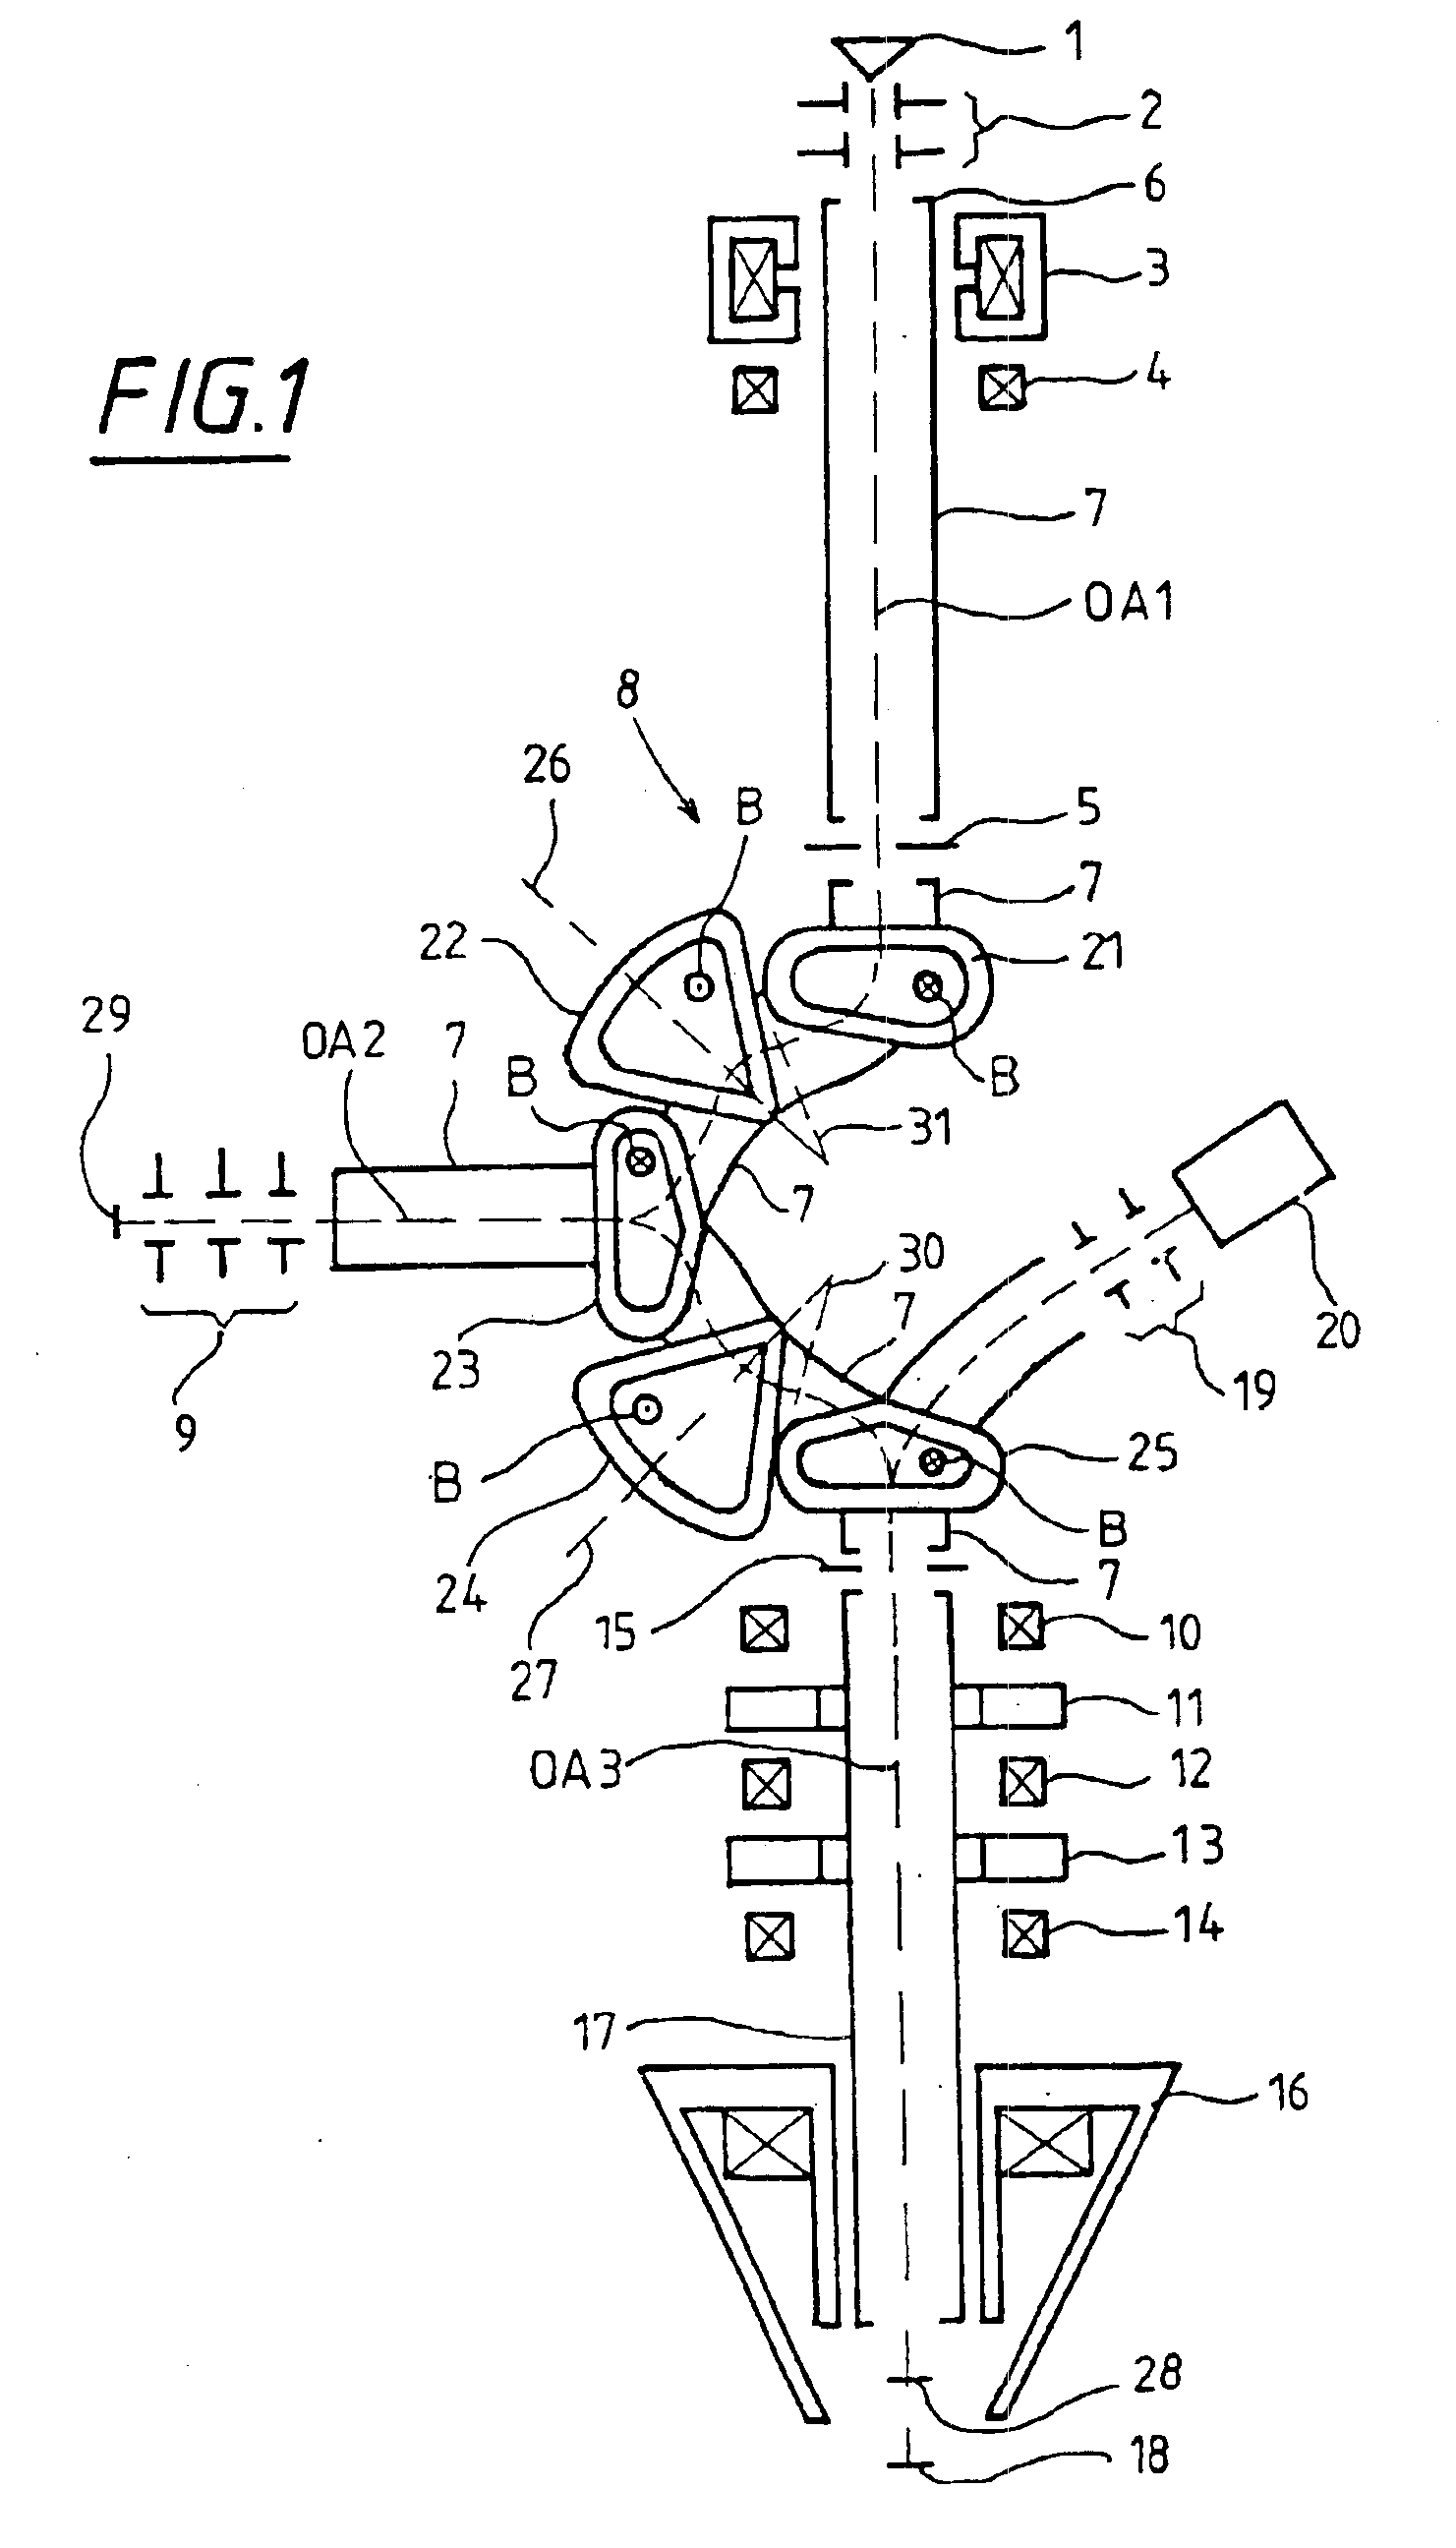 Particle beam system having a mirror corrector